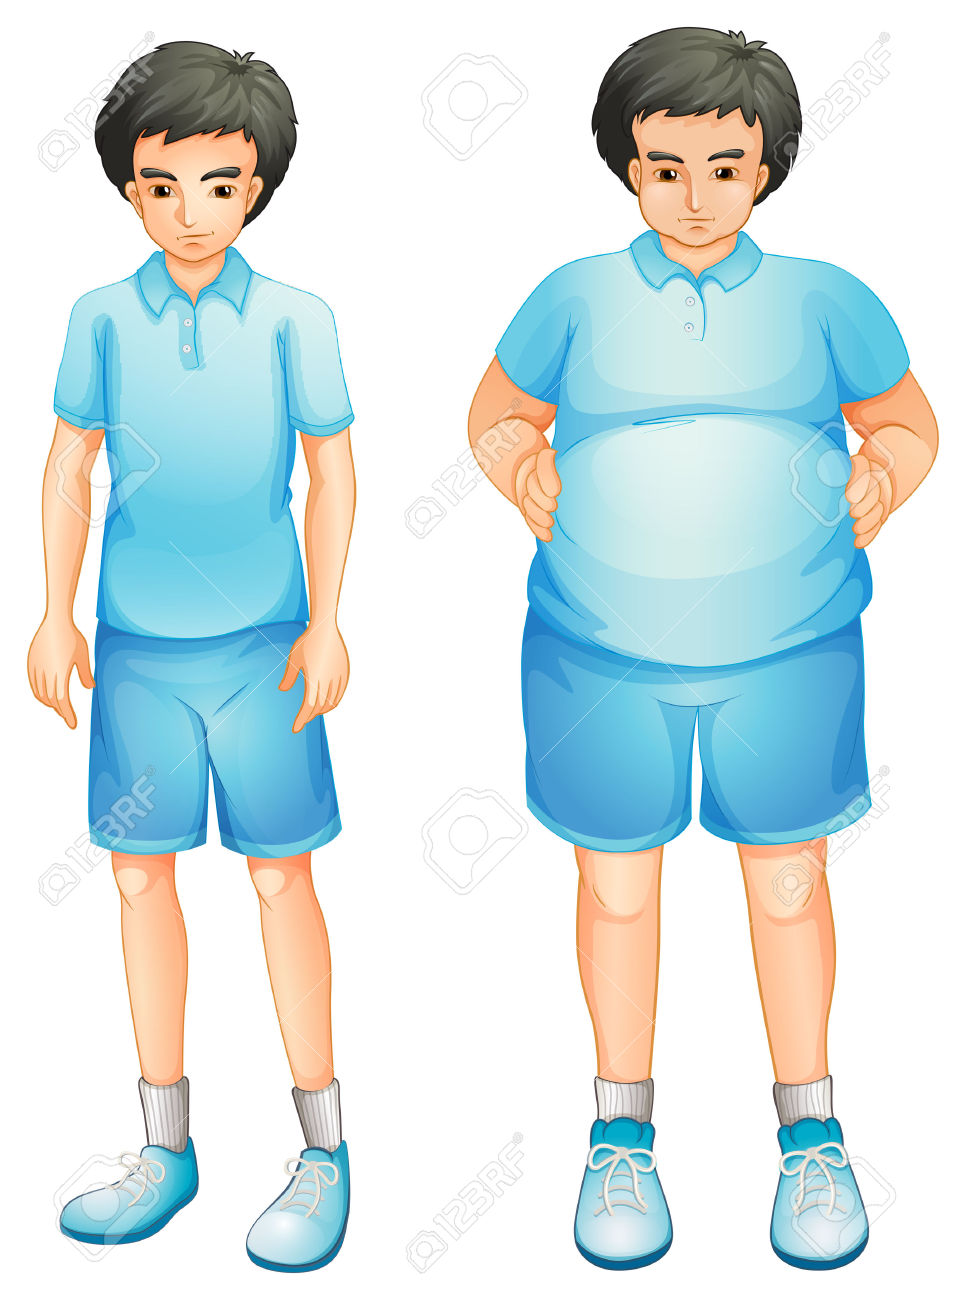 Fat And Thin Boy Clipart.